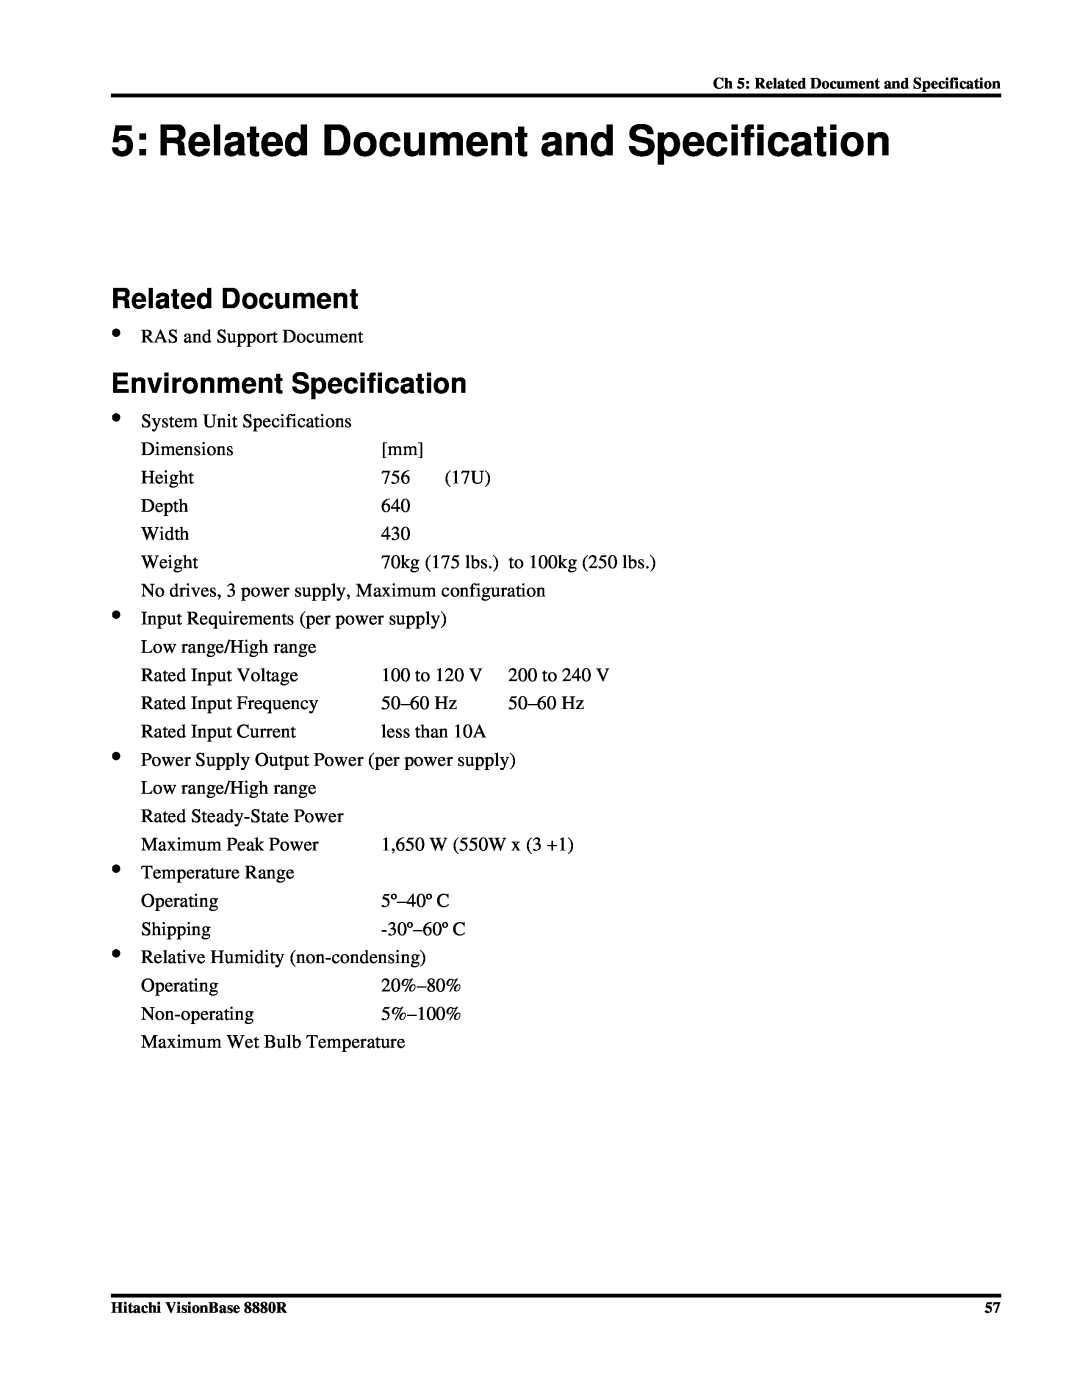 Hitachi 8880R manual Related Document and Specification, Environment Specification 